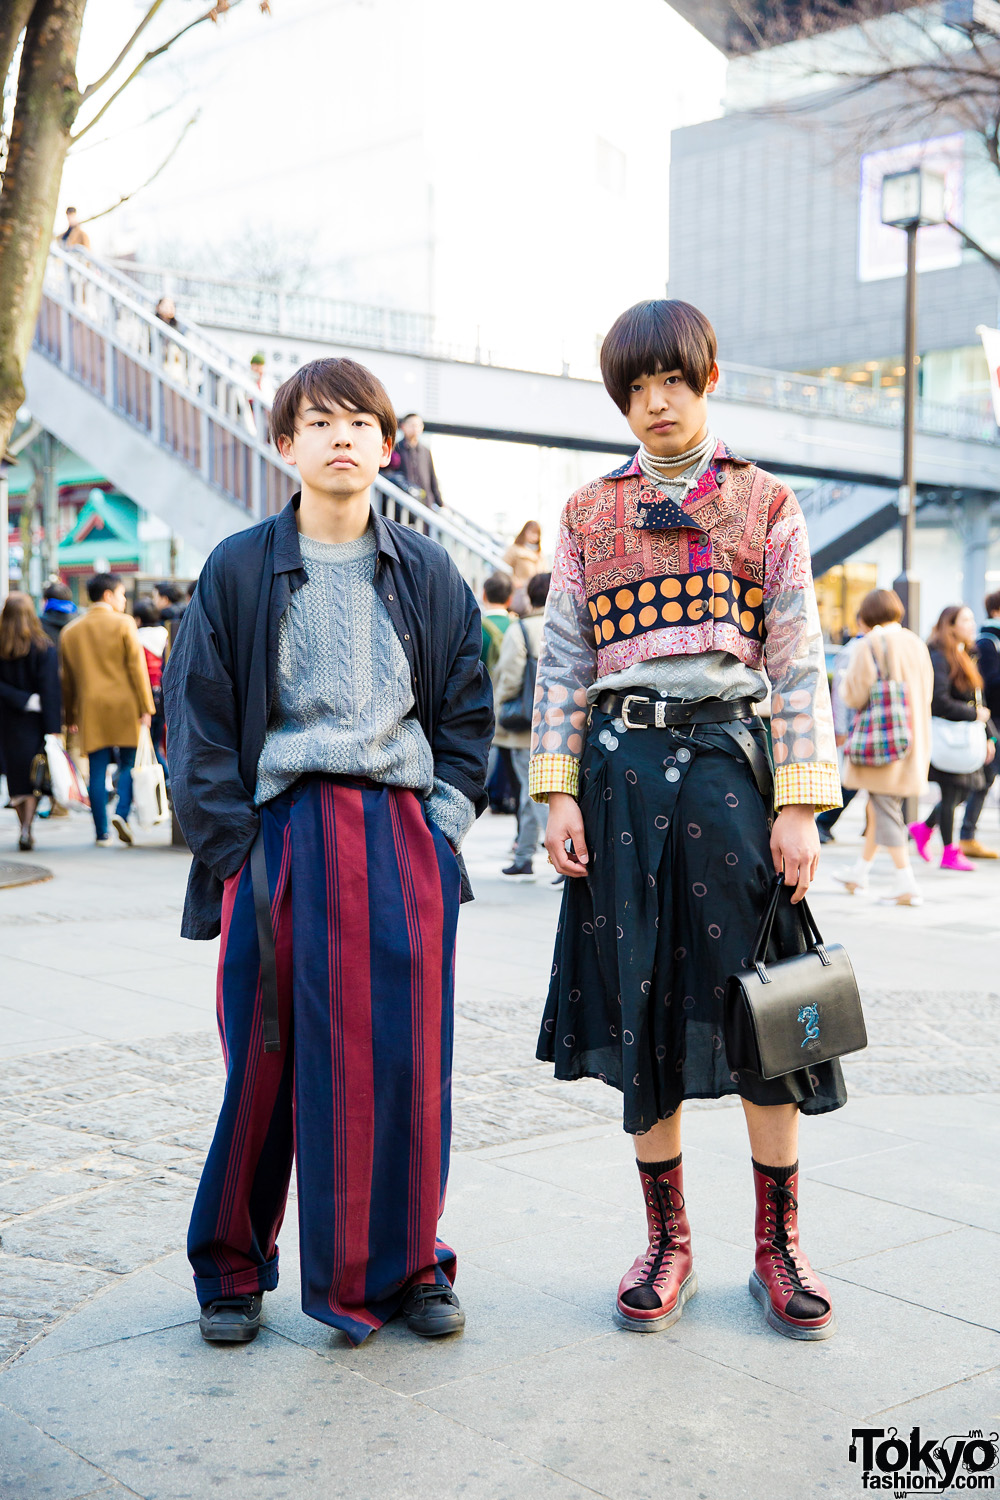 Japanese Mixed Prints Streetwear w/ Issey Miyake, Christian Dior, Converse, Jean Paul Gaultier, Dr. Martens, Levi's & Y's